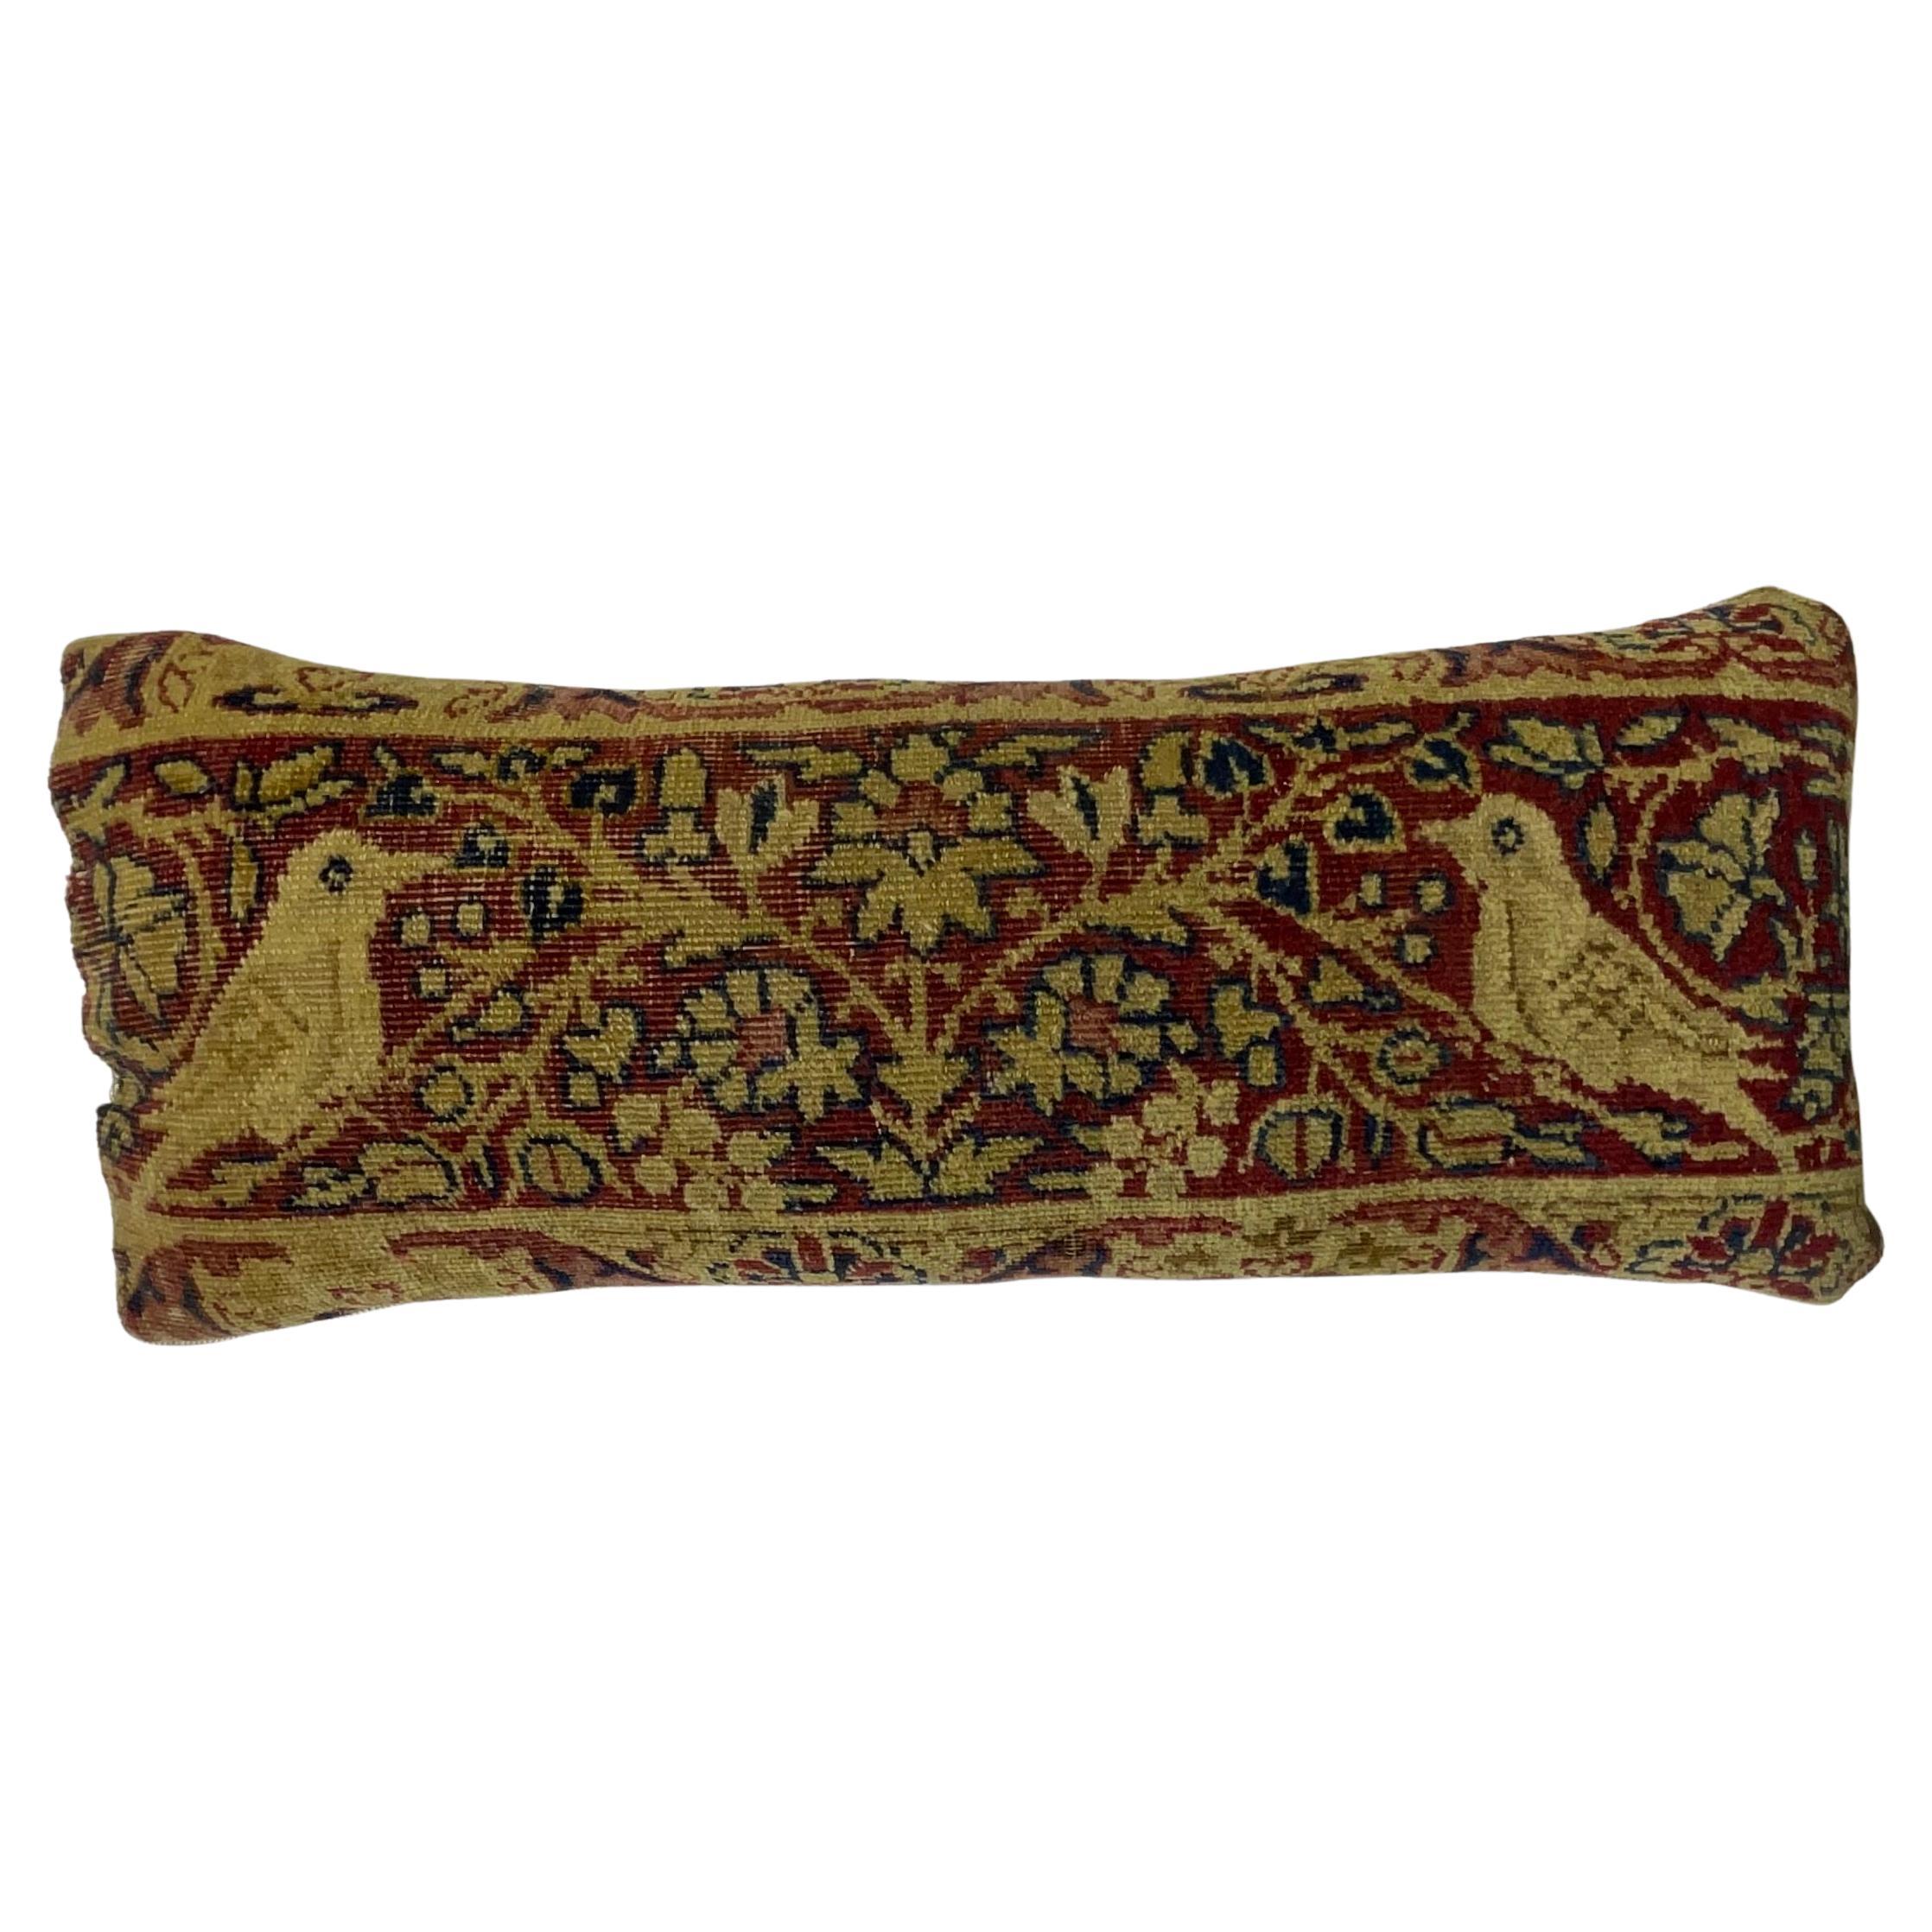 Small Single Antique Hand Woven Pictorial Hand Woven Pillow